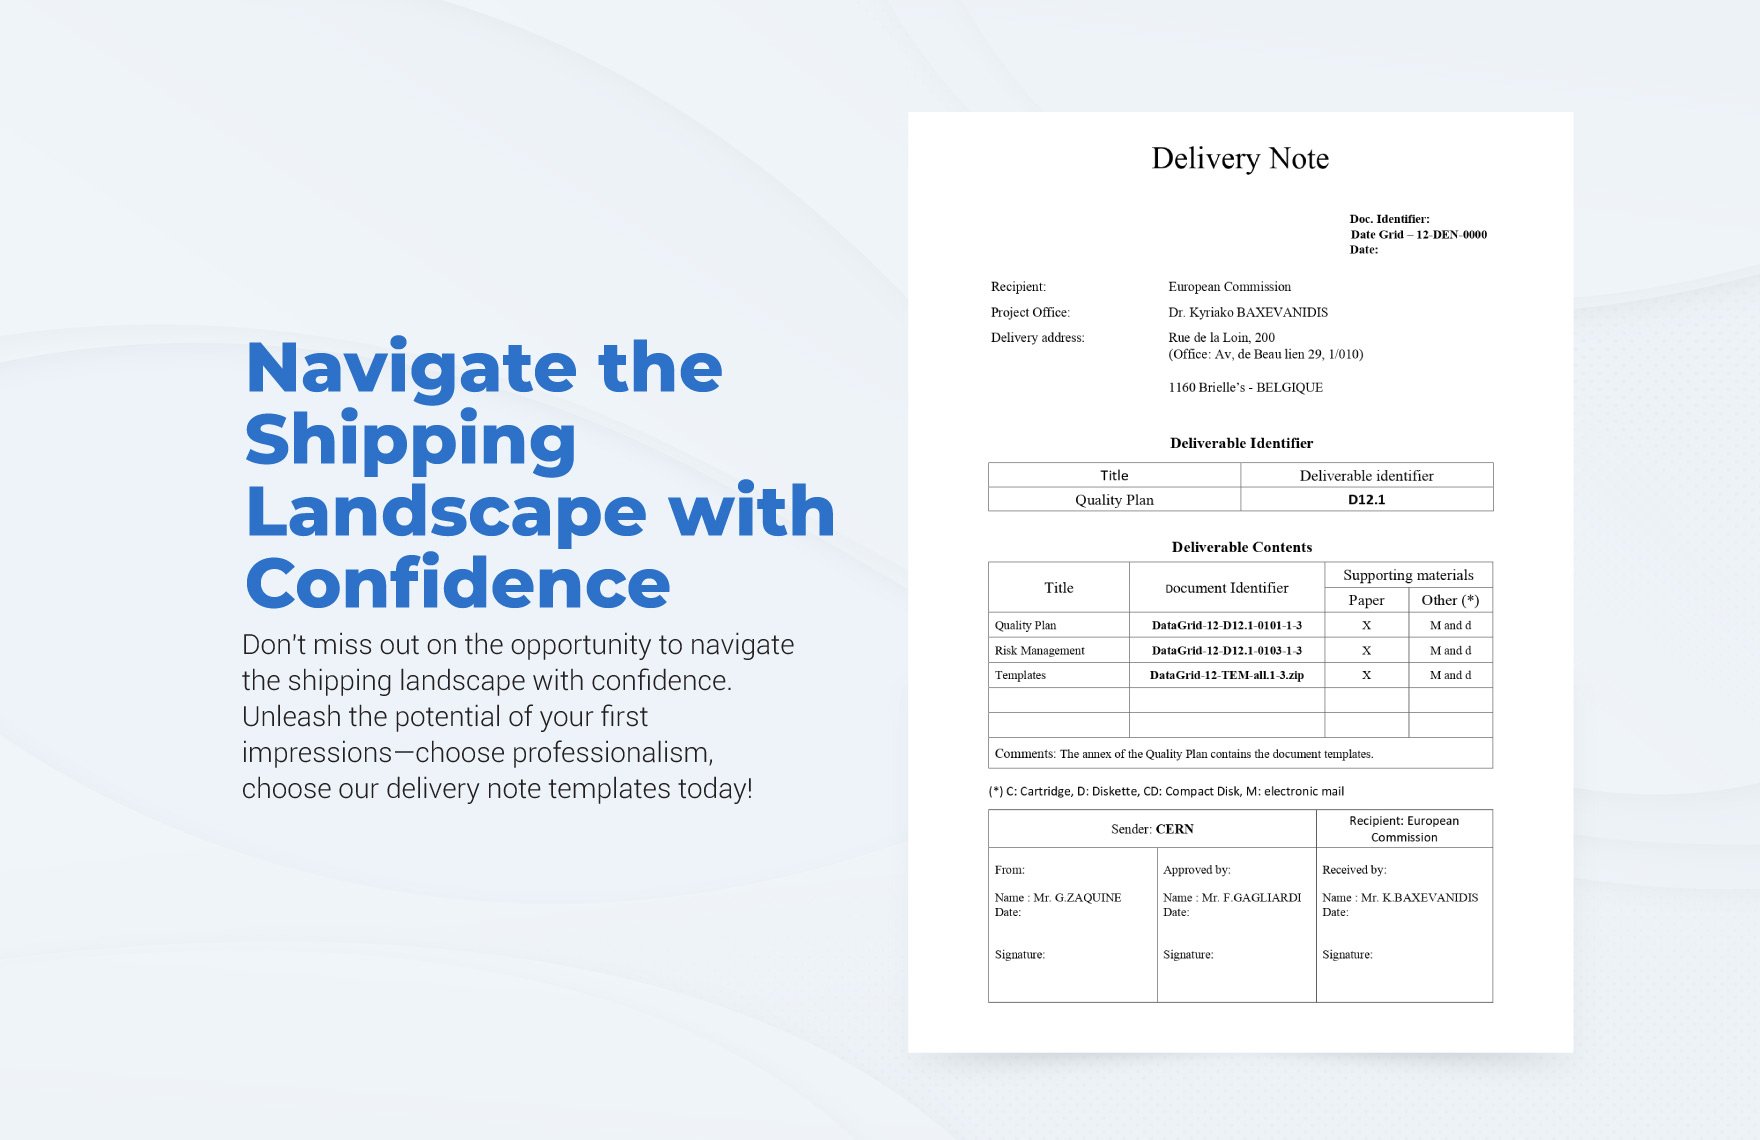 Sales Delivery Note Template